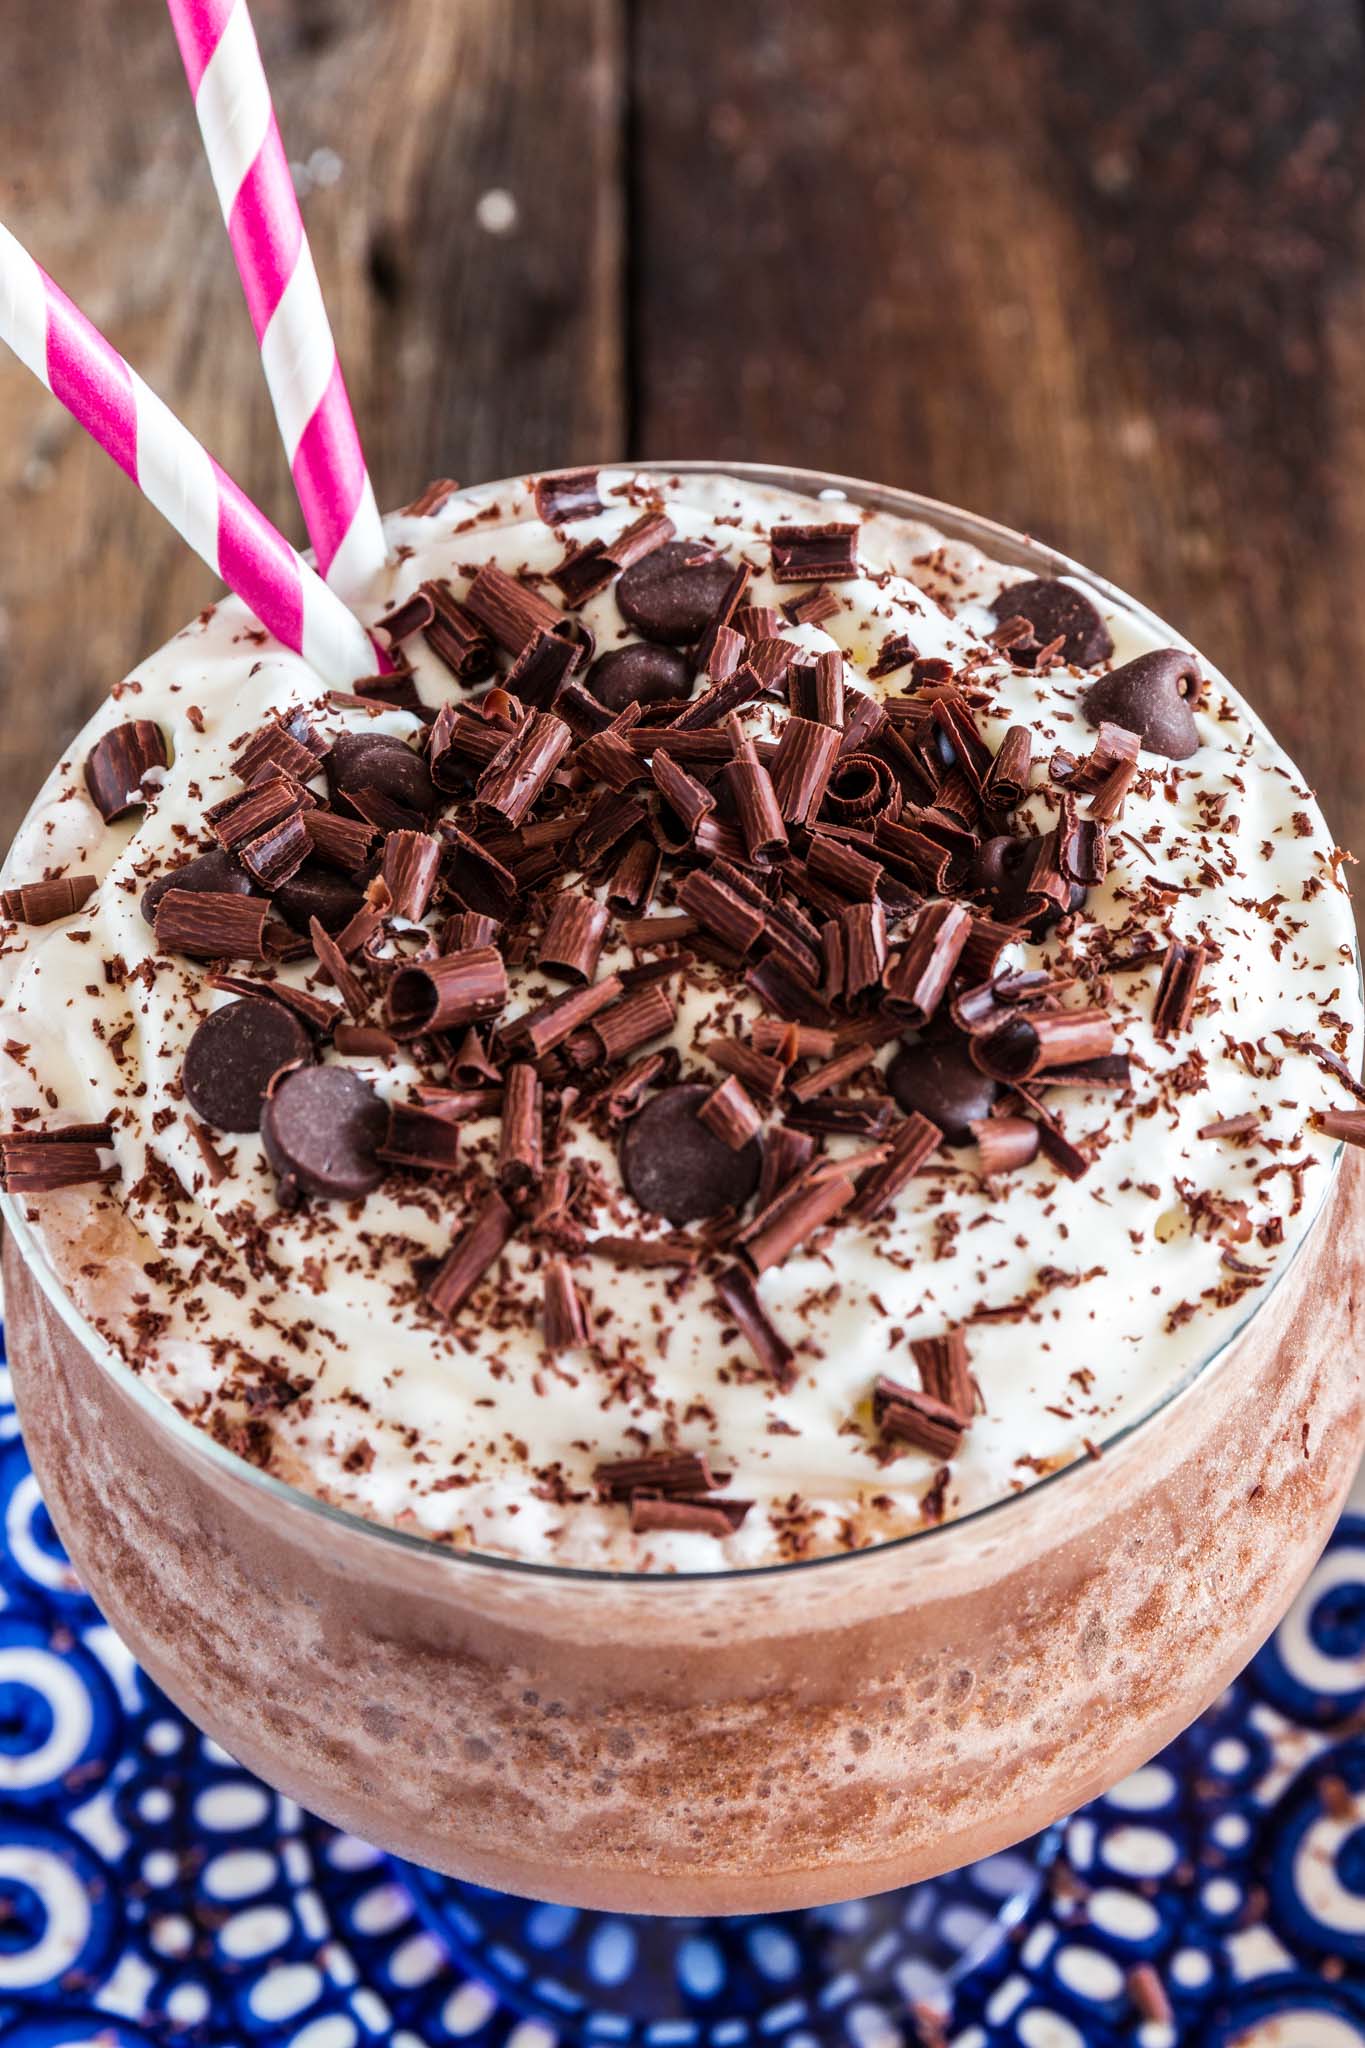 Frozen Hot Chocolate | www.oliviascuisine.com | Deliciously irresistible, this Frozen Hot Chocolate - inspired by the version served at Serendipity in NYC - is the ultimate summer treat! No wonder it makes Oprah want to "dance on the chandeliers". ??? (Recipe by @oliviascuisine.)